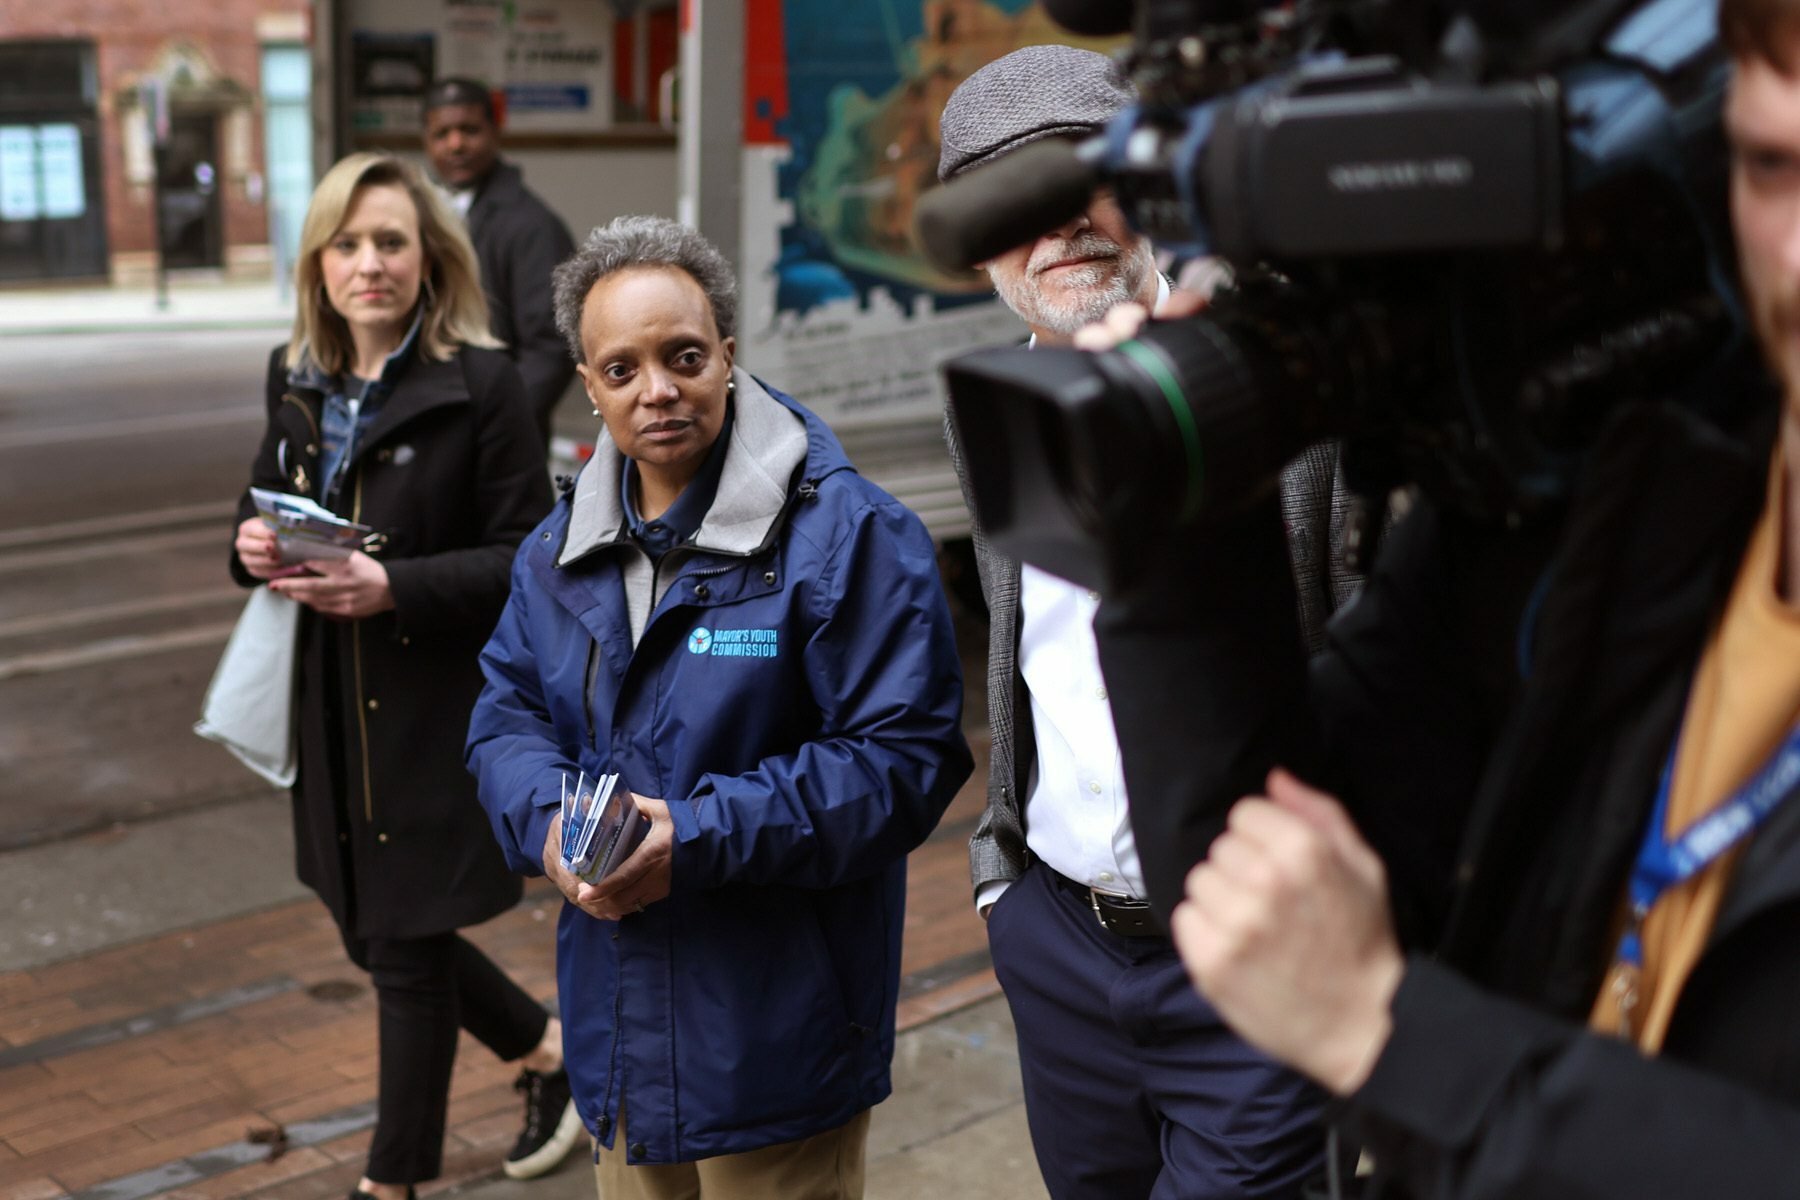 Chicago Mayor Lori Lightfoot walks on a city street with a man holding a camera in the foreground